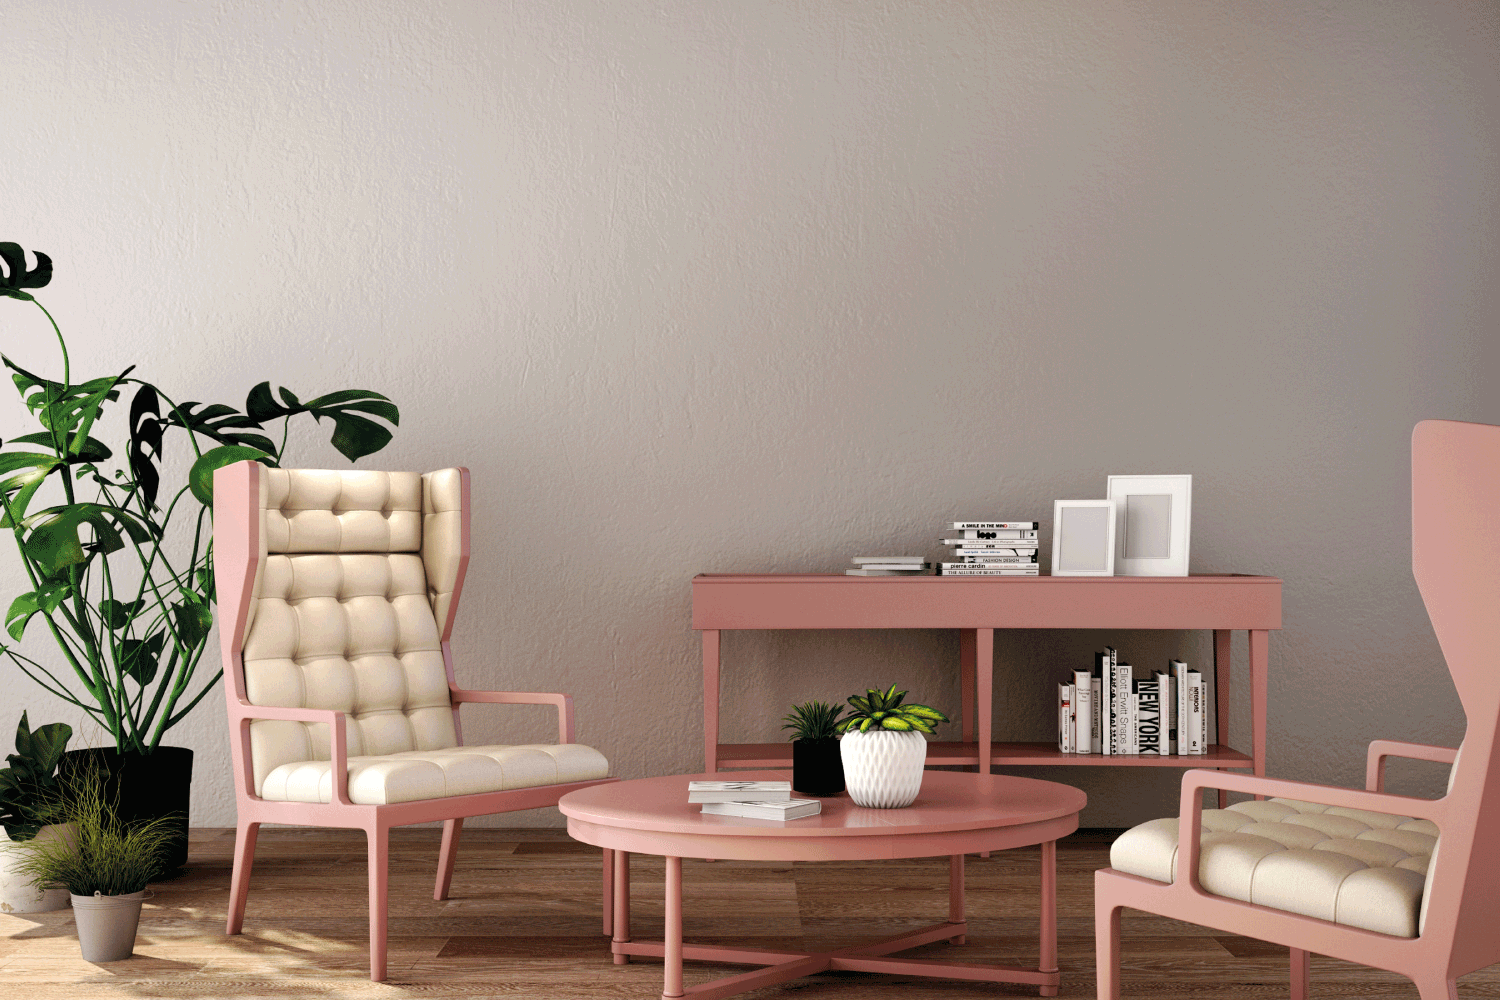 reception in modern style with couple armchair, table,plant on wood floor and gray wall. pink accents